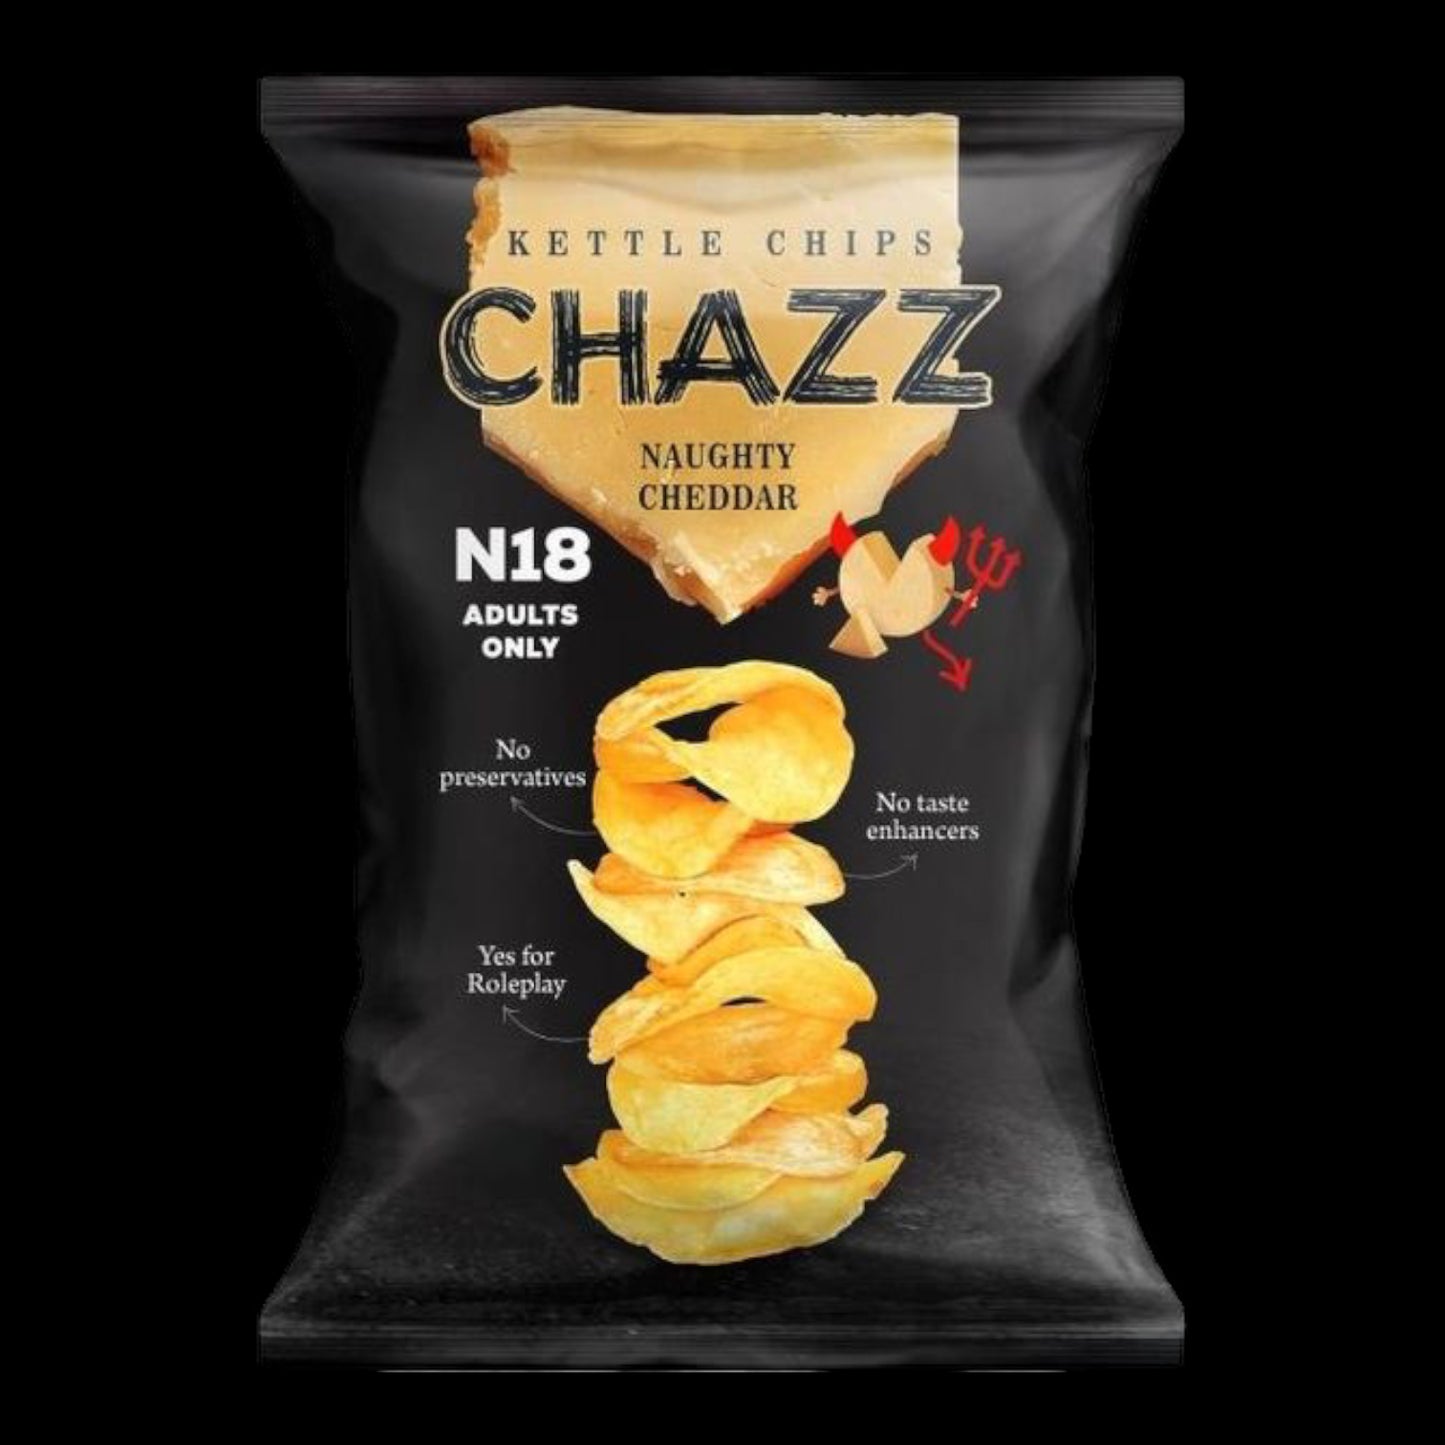 CHAZZ Kettle Chips Naughty Cheddar 90g